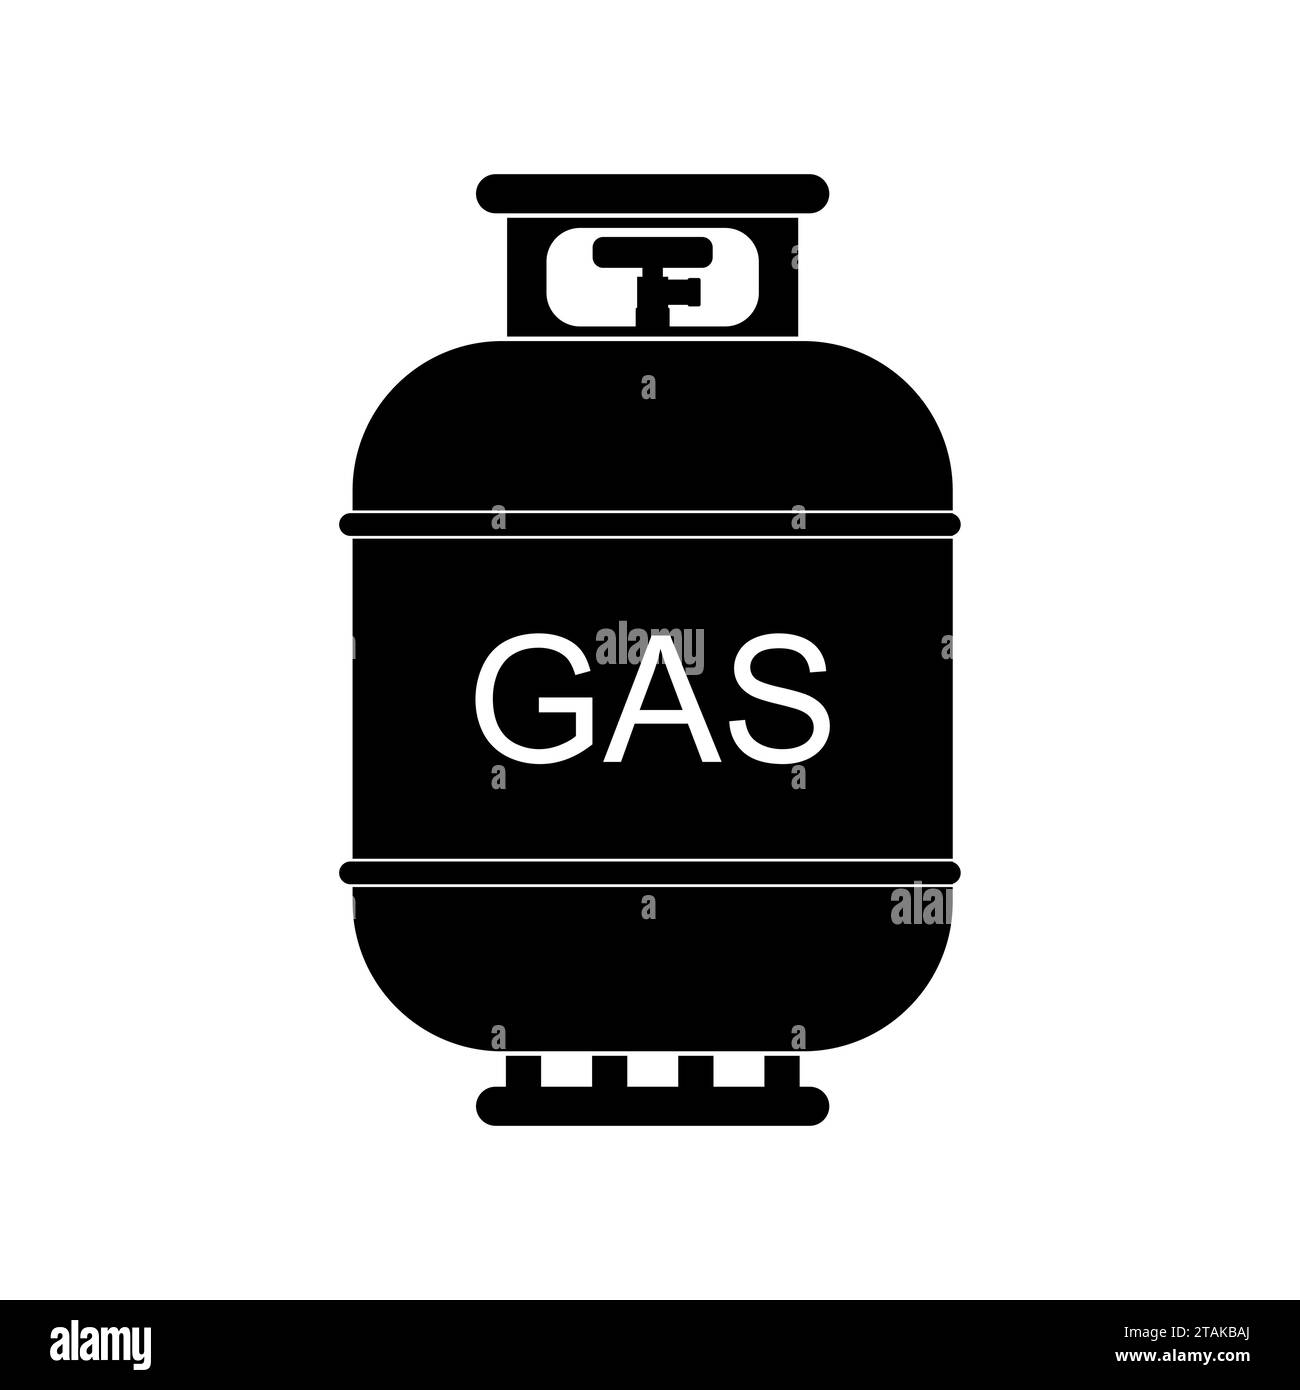 Isolated icon argon gas in green container Vector Image